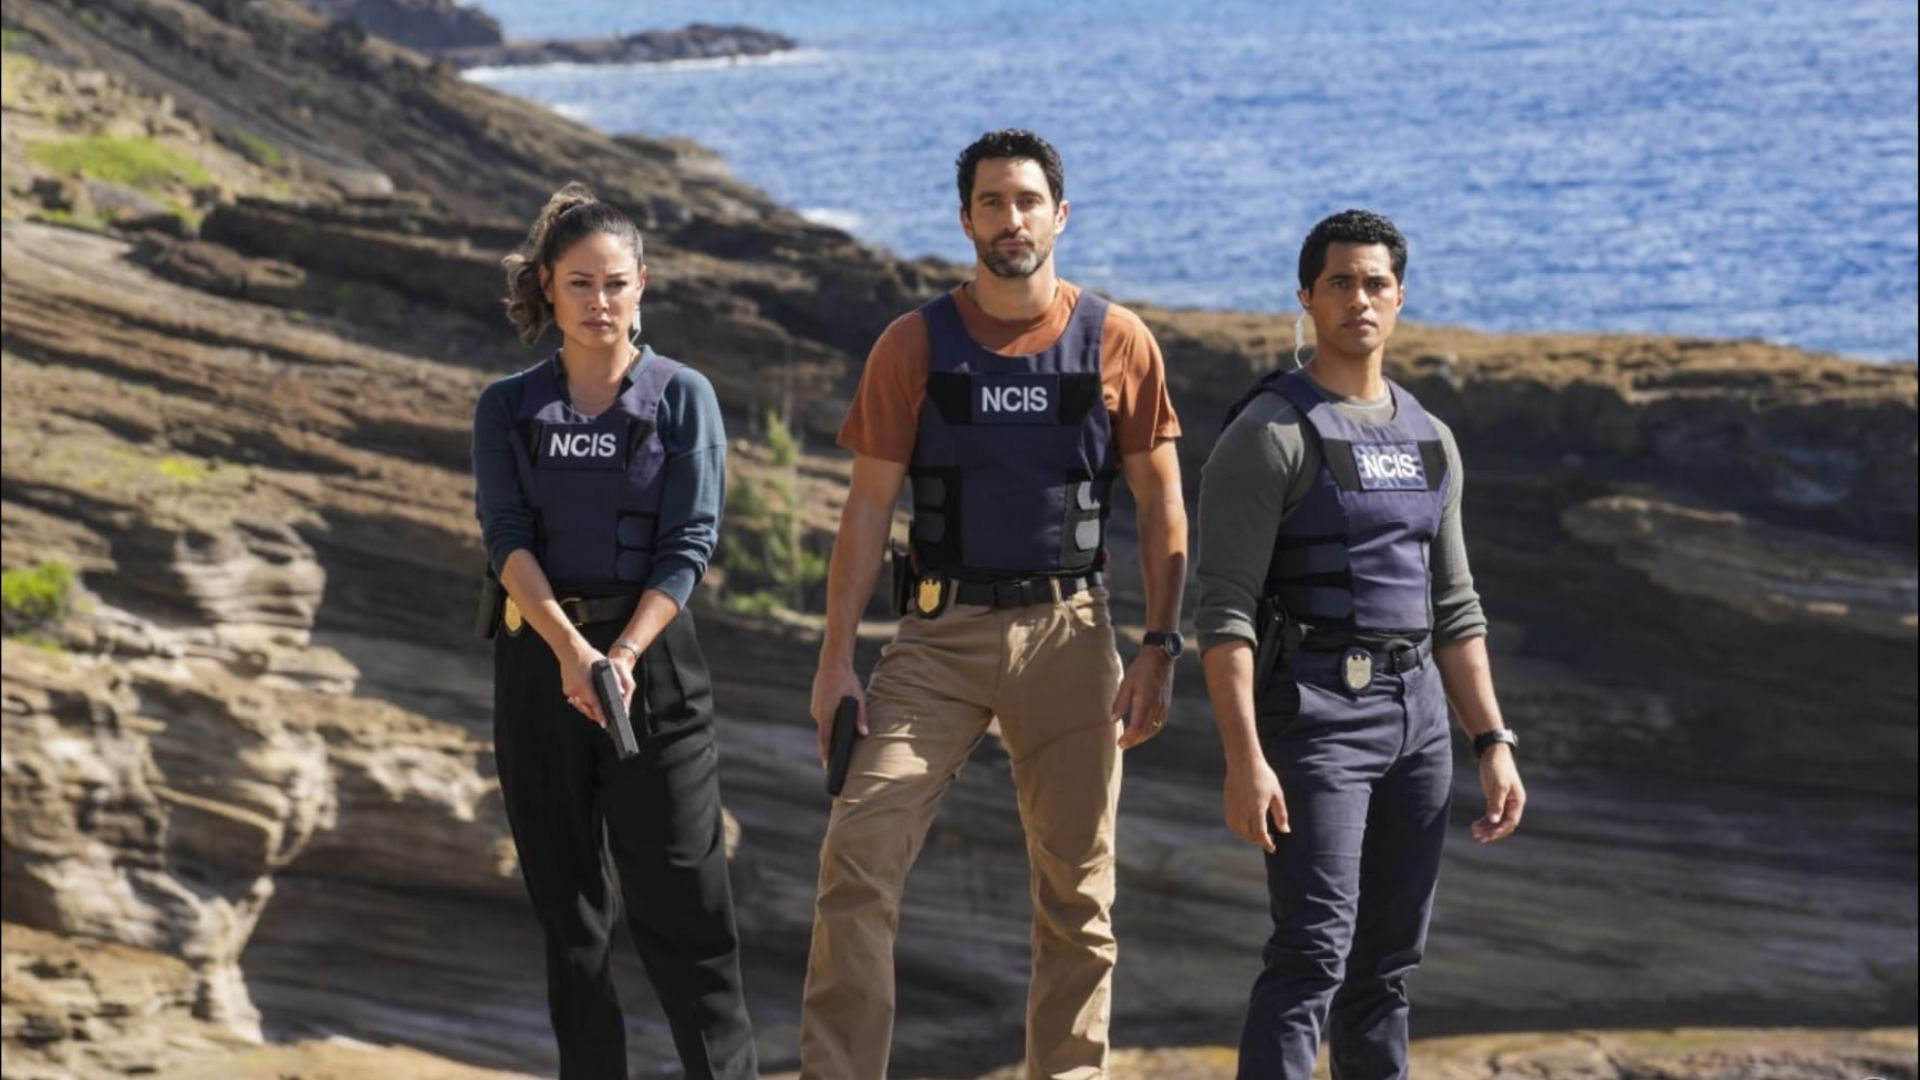 Next episode of NCIS: Hawai&#039;i will arrive on its usual Monday slot (Image via CBS)